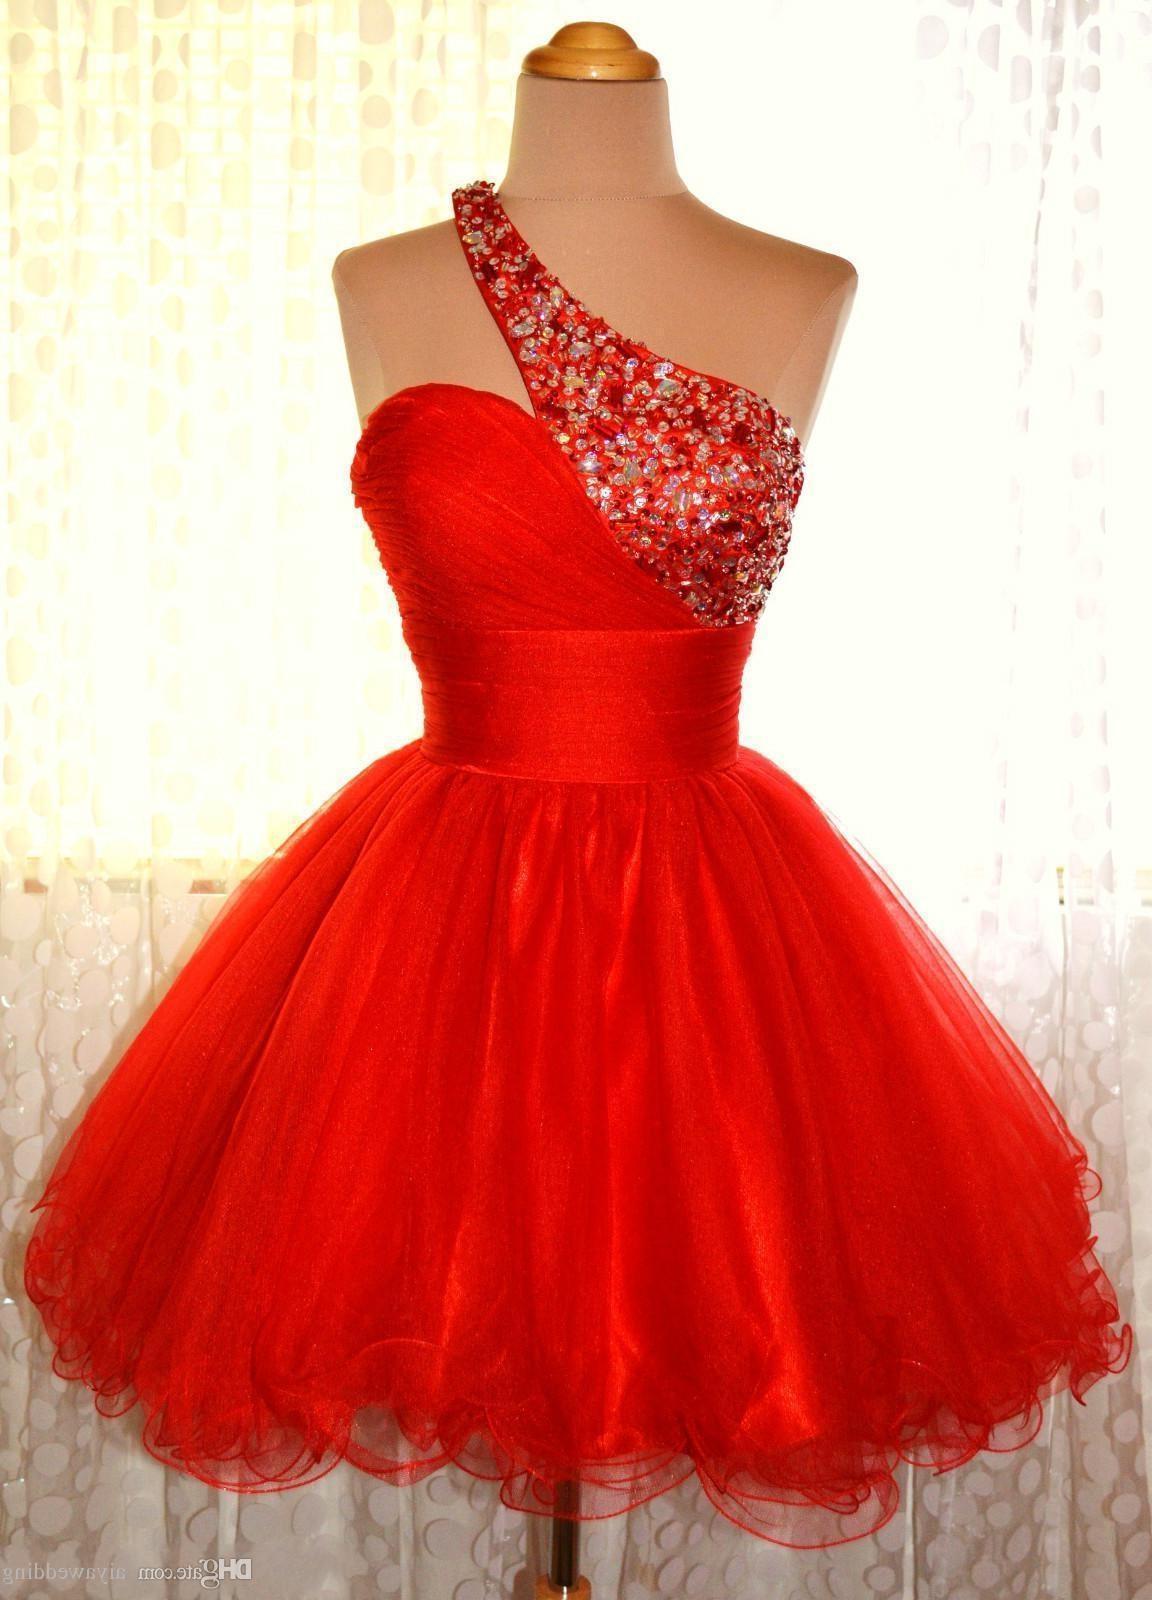 Party Dress Ladies, One Shoulder Red Sleeveless A Line Organza Pleated Rhinestone Homecoming Dresses